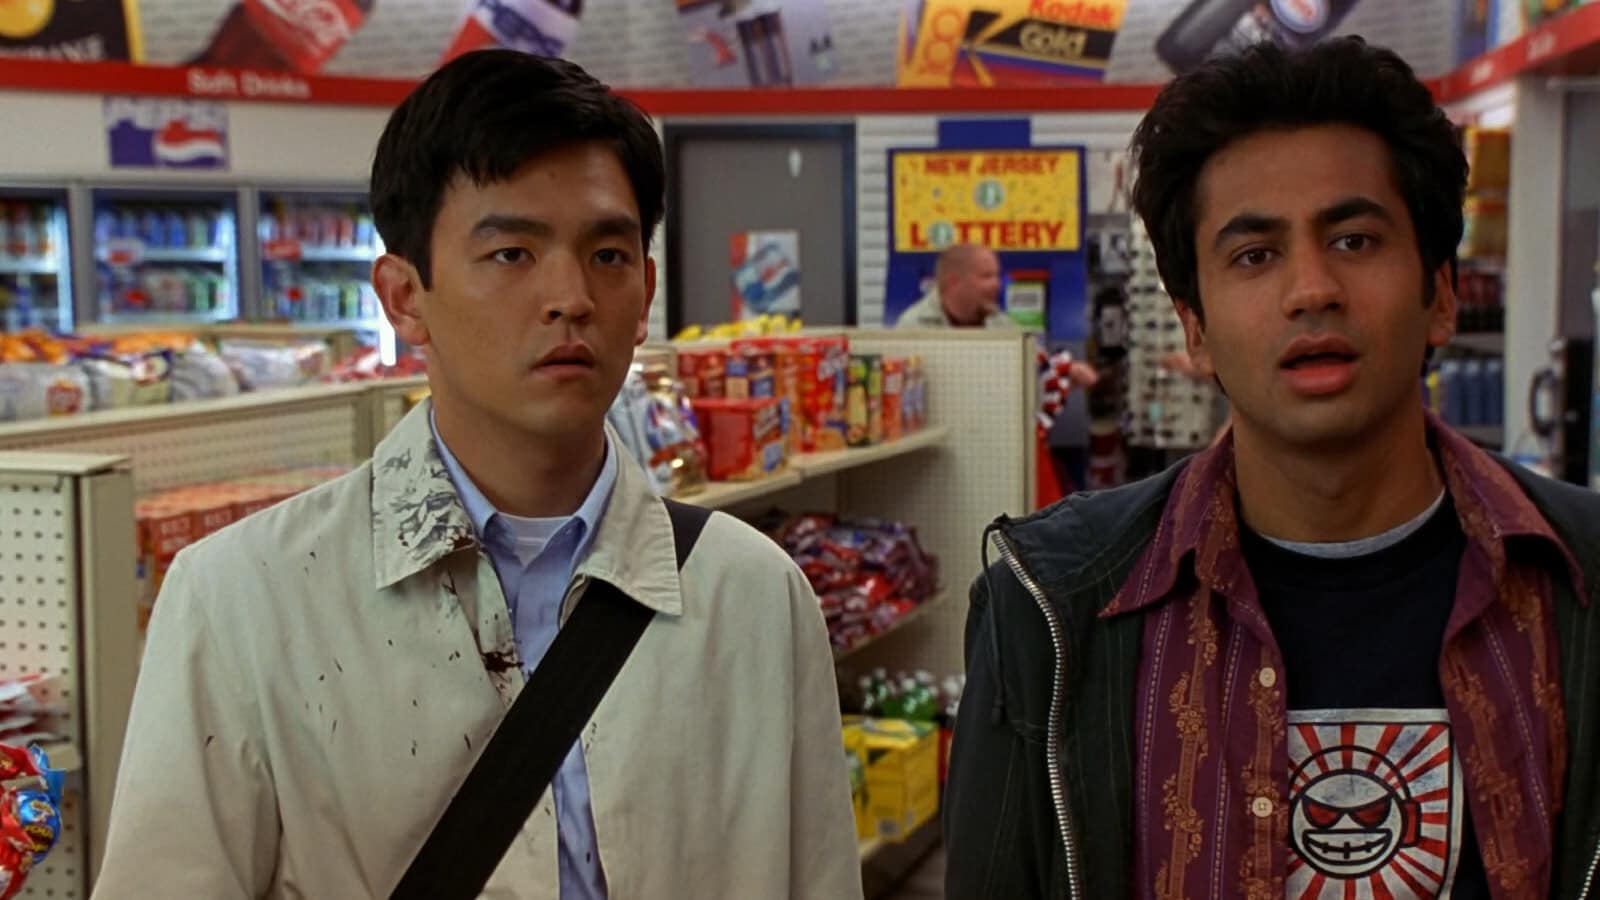 Kal Penn and John Cho in a still from the cult classic comedy Harold &  Kumar Go to White Castle.